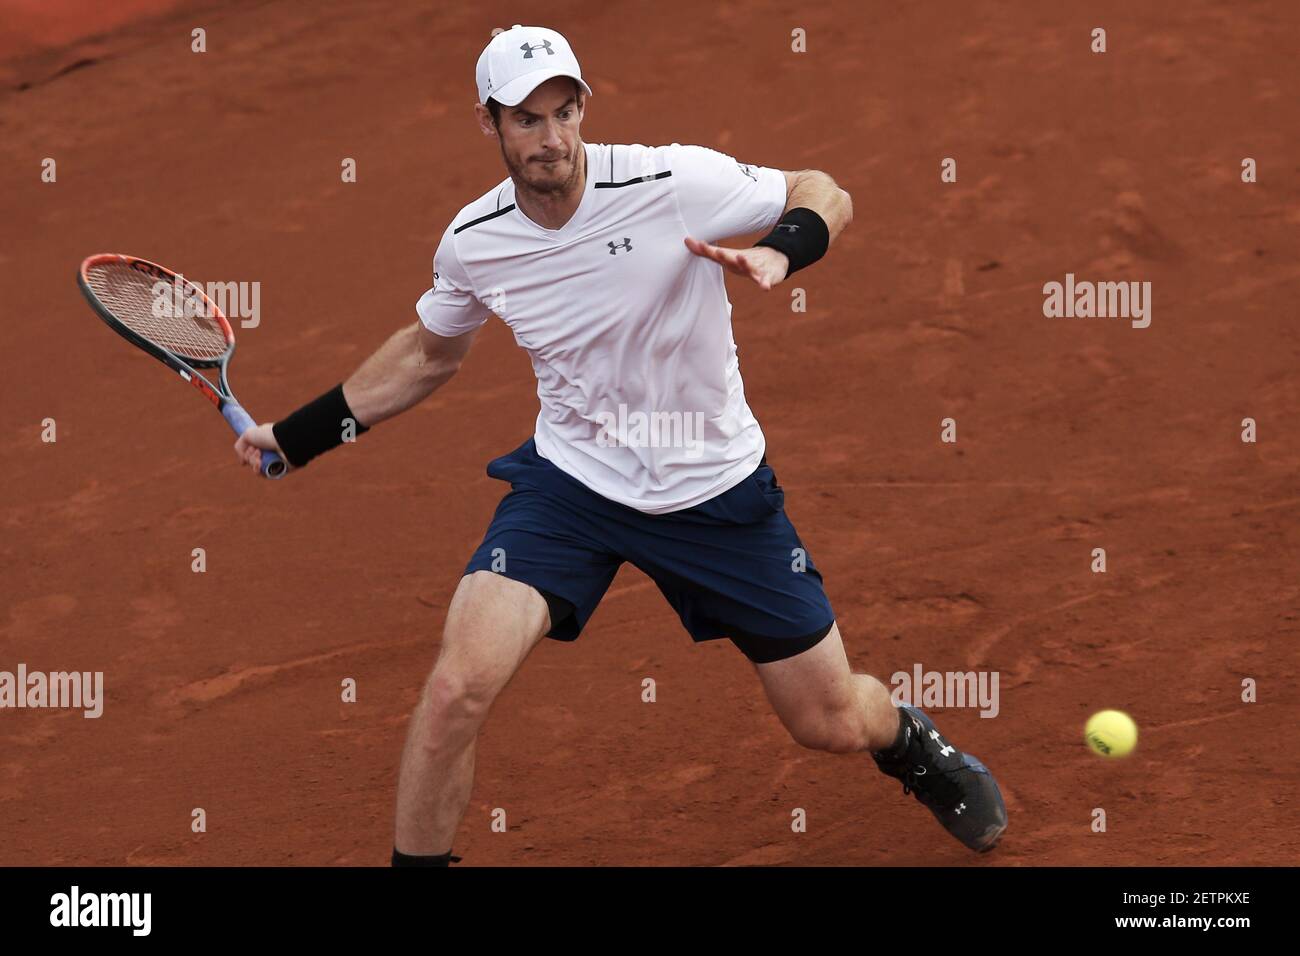 British Andy Murray hits the ball during the ATP 2017 Barcelona Open Round  of 16 match against Spanish Feliciano Lopez at the Reial Club de Tenis in  Barcelona, Spain, April 27, 2017.